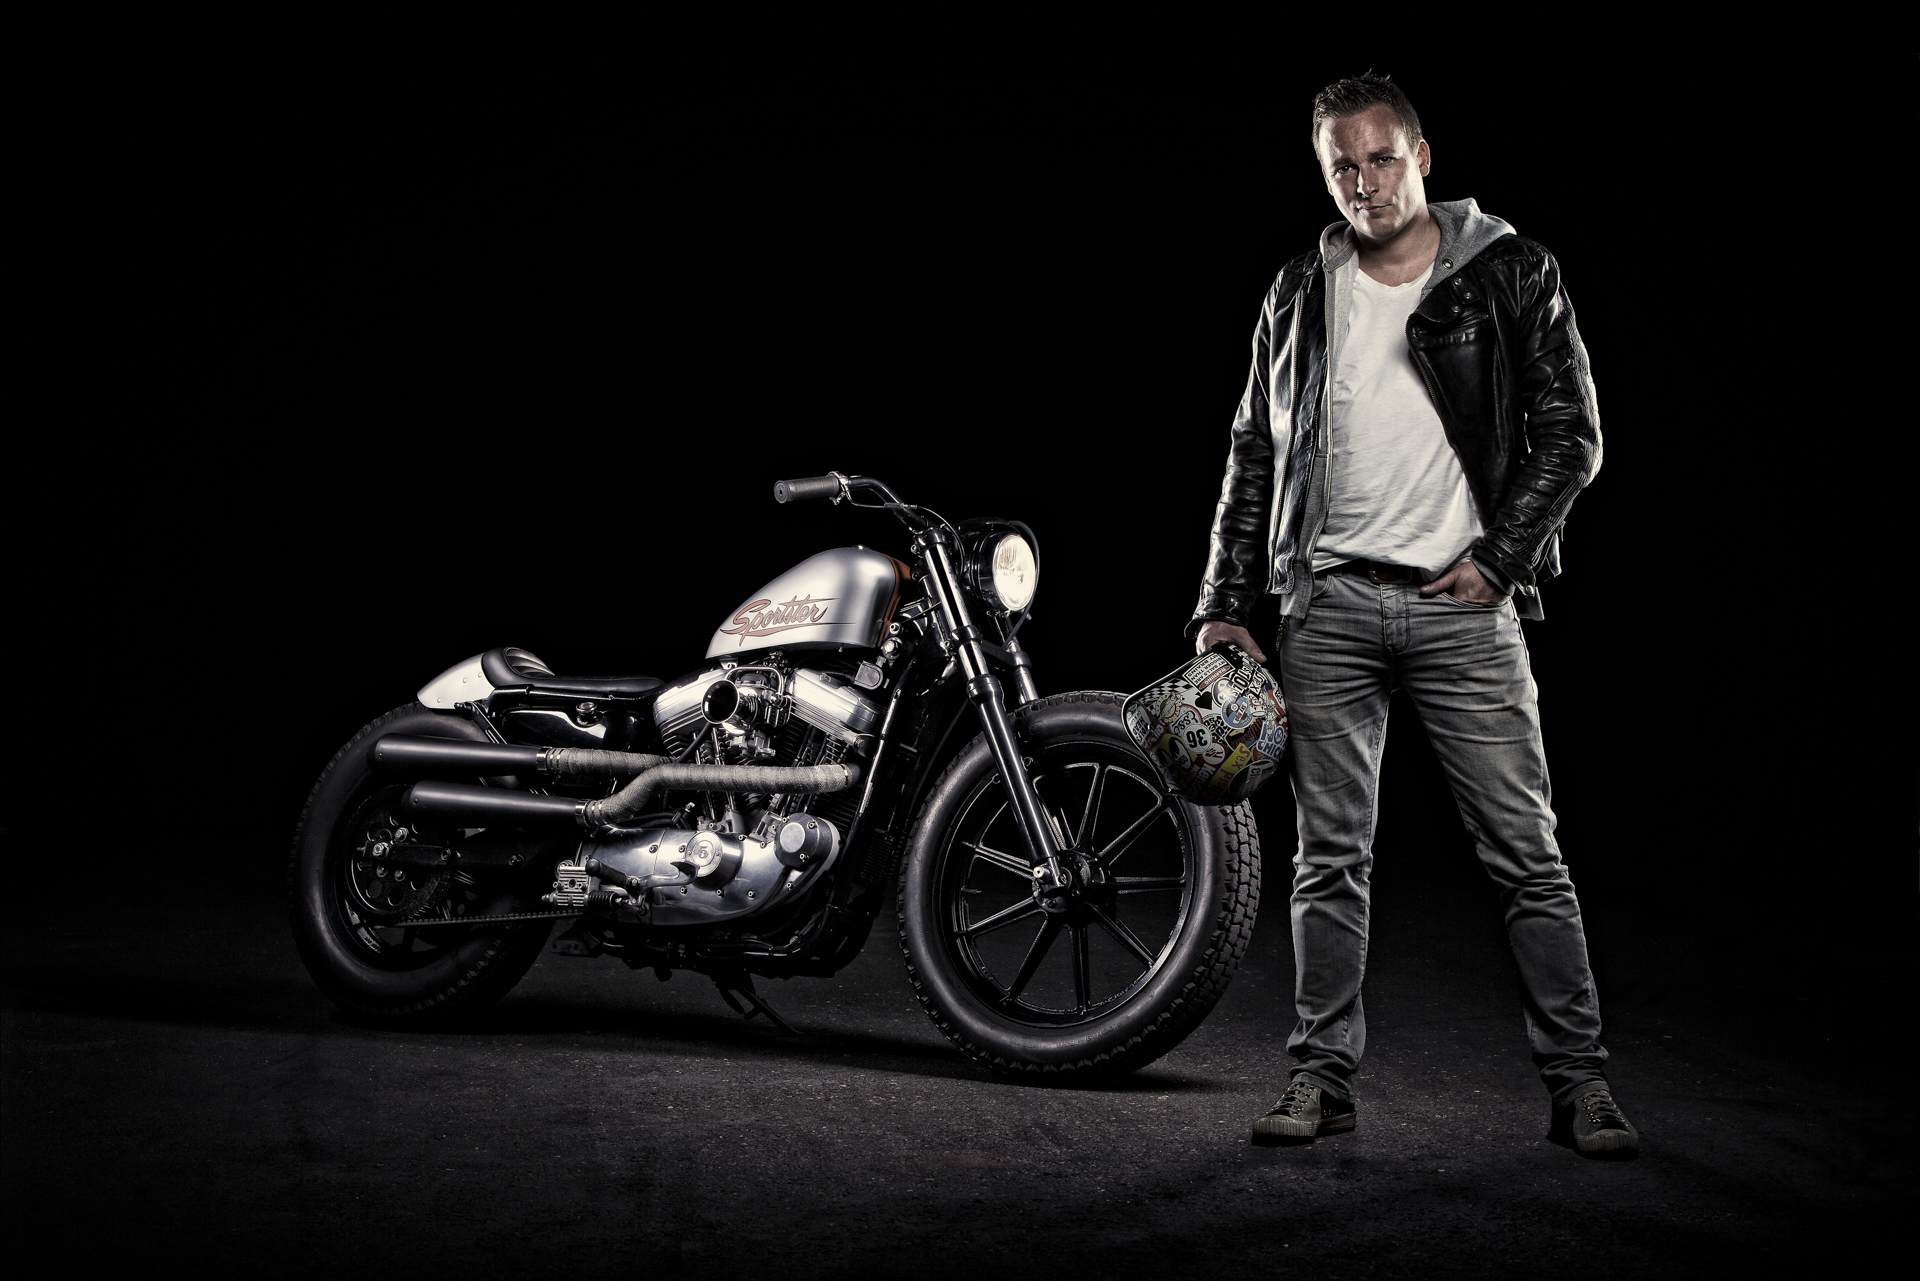 Ruben and his Harley Sportster 883